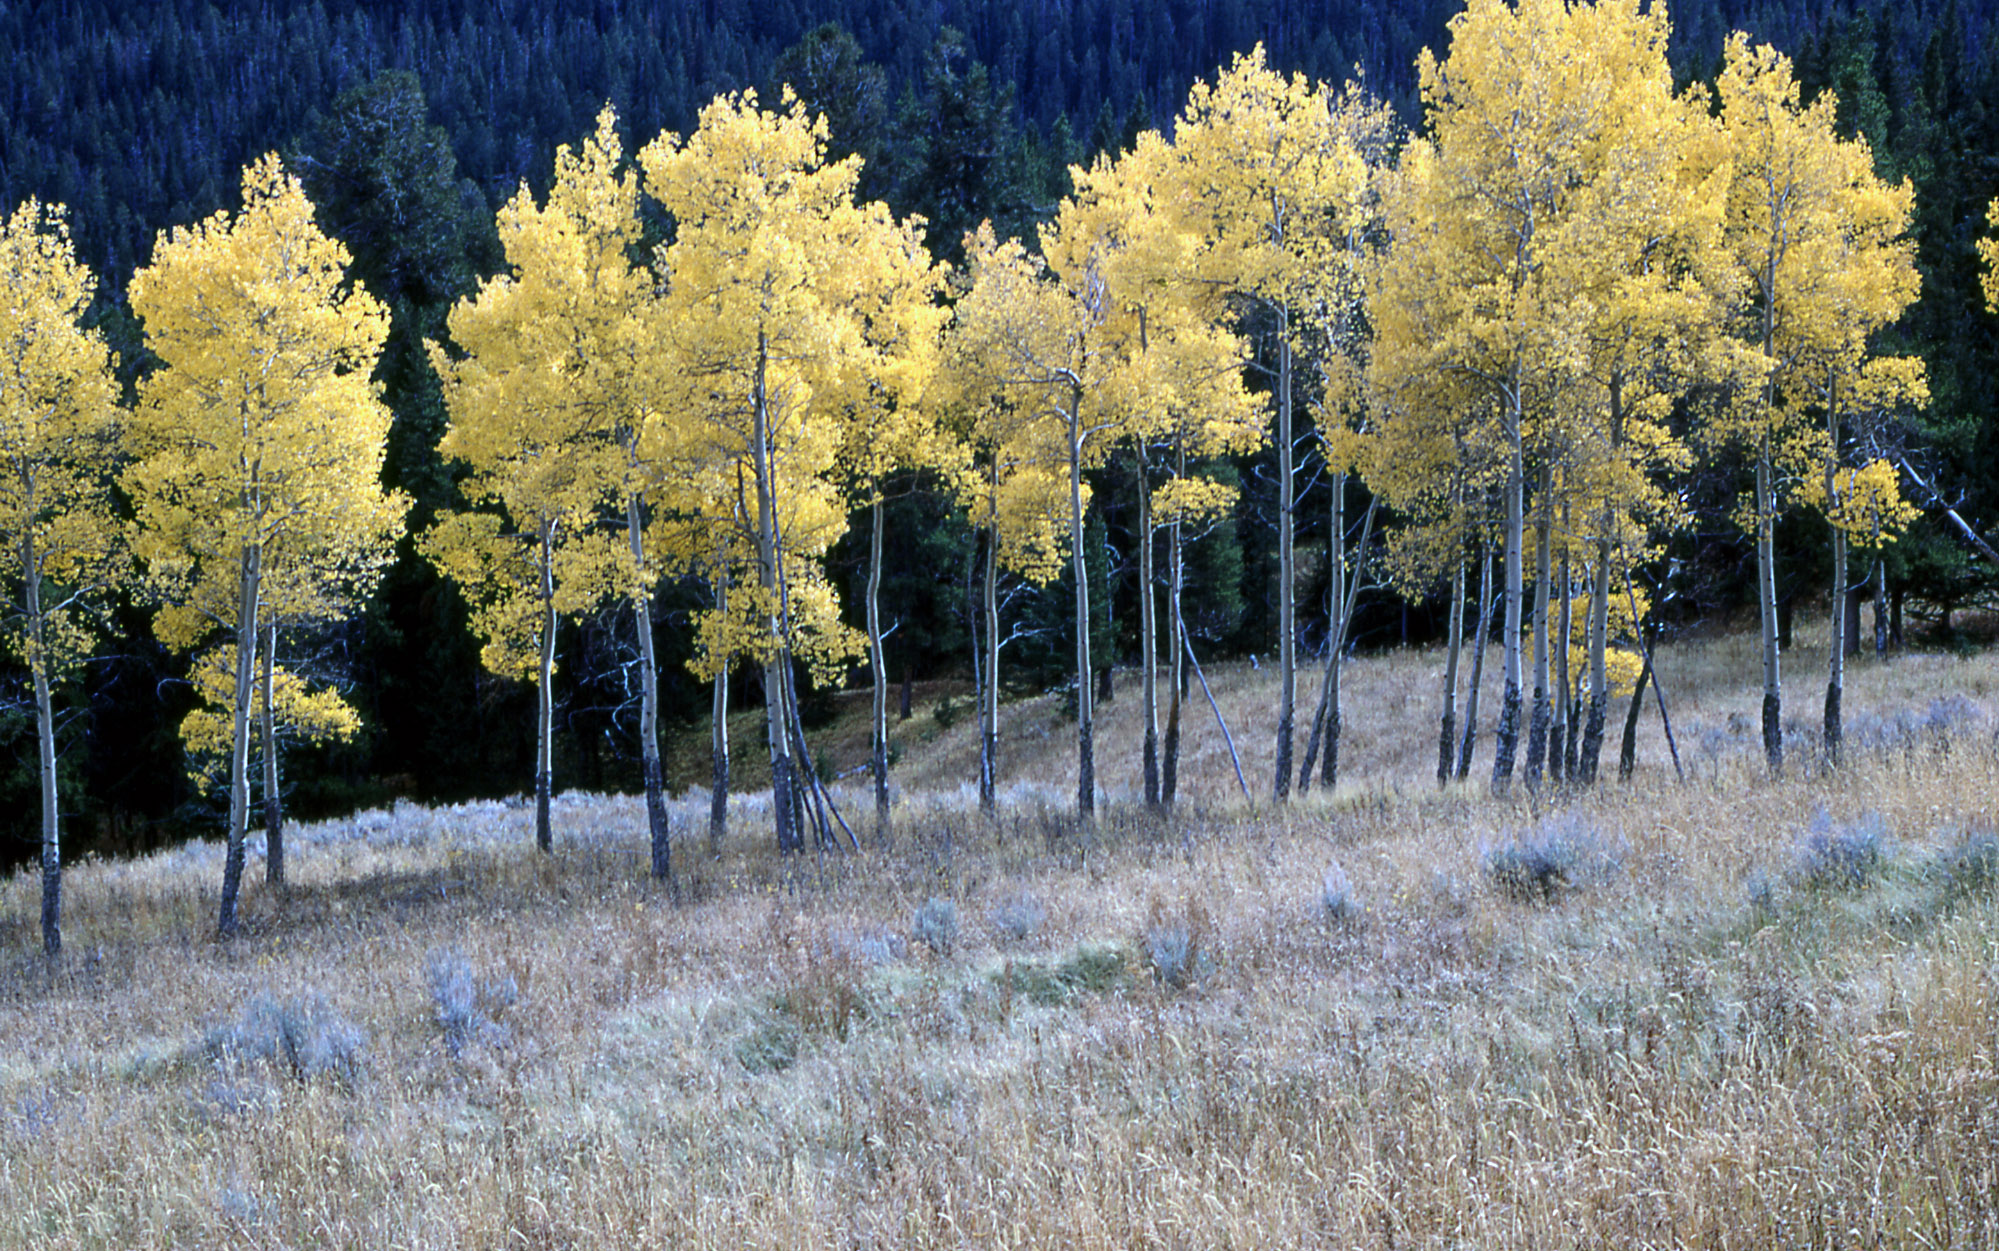 Quaking Aspen trees are one of the ozone sensitive species found at Great Sand Dunes NP & Pres.